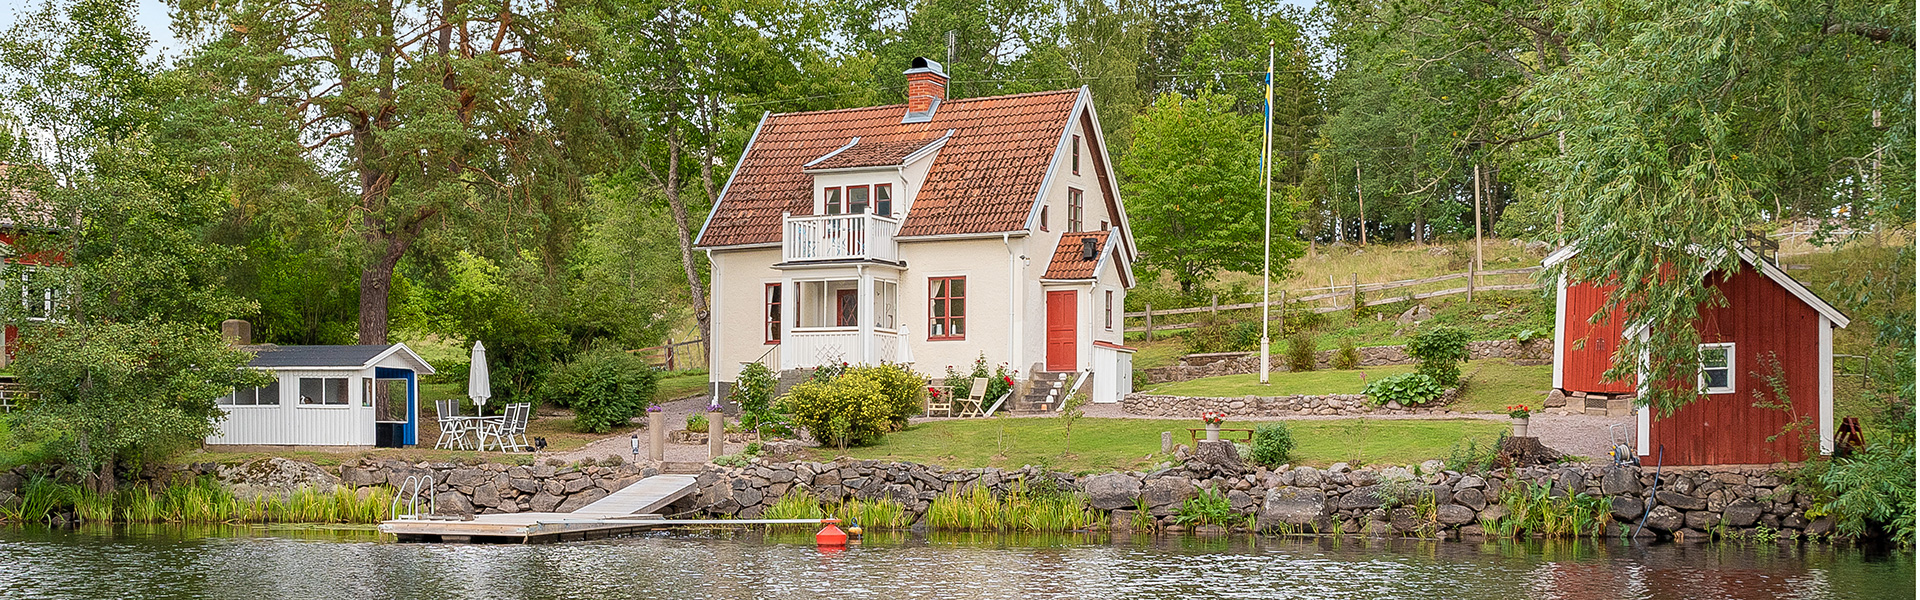 Private Islands For Sale Lake House In Sweden Sweden Europe